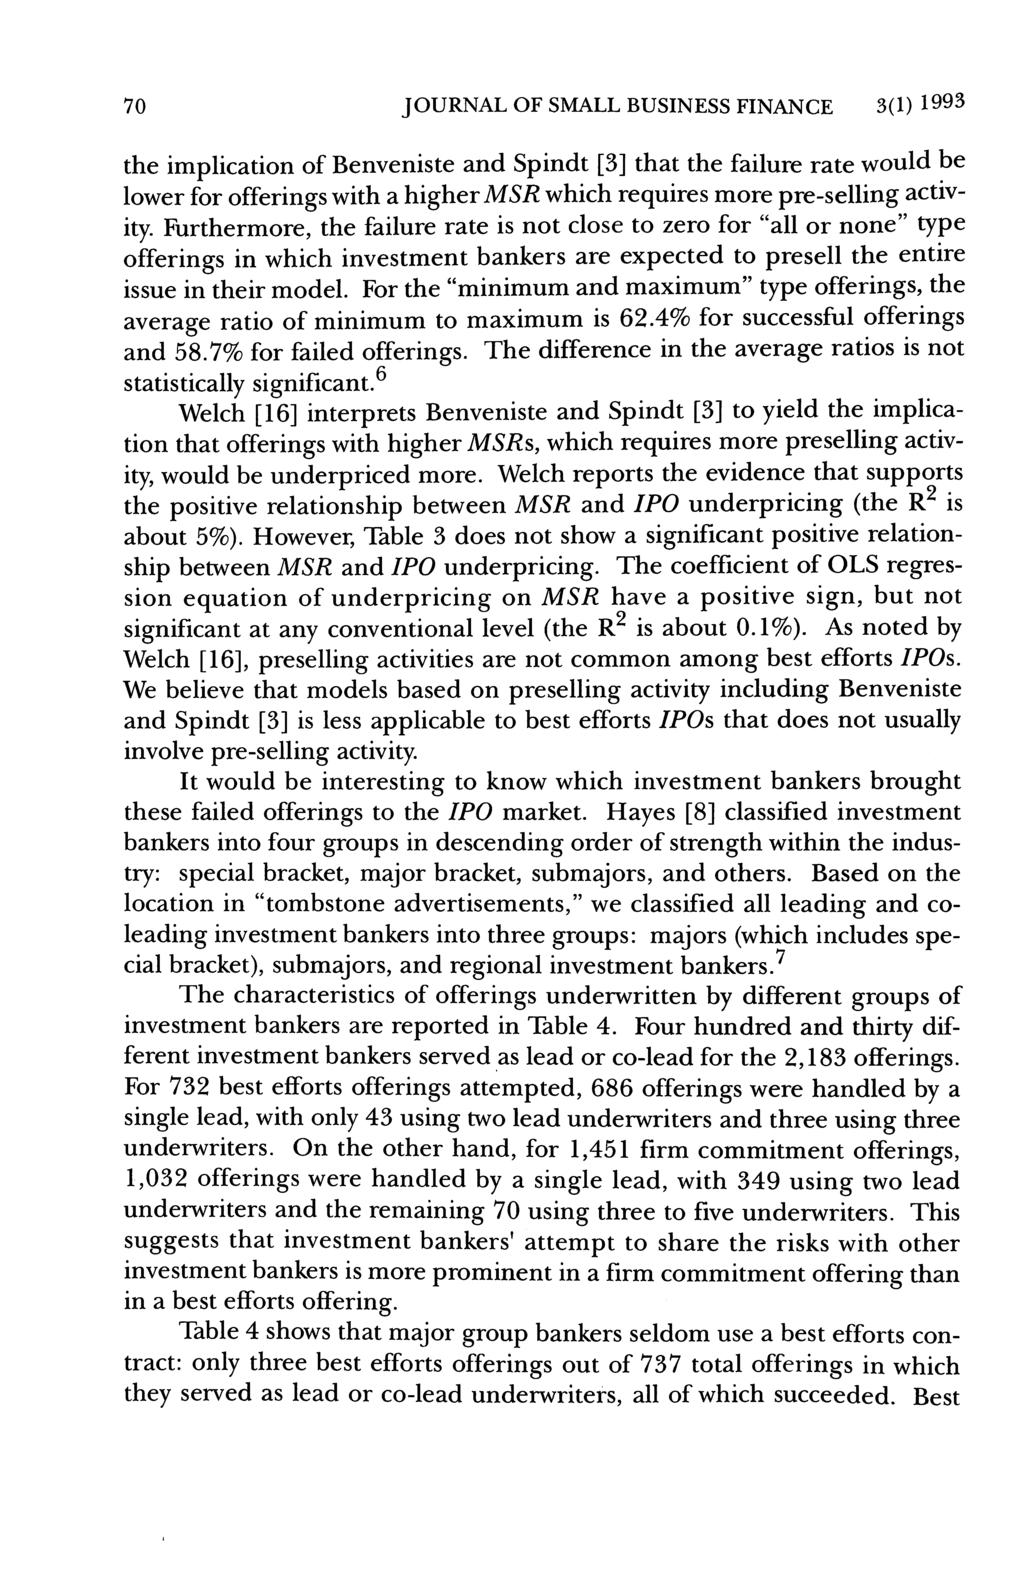 70 JOURNAL OF SMALL BUSINESS FINANCE 3(1)1993 the implication of Benveniste and Spindt [3] that the failure rate would be lower for offerings with a higher which requires more pre-selling activity.